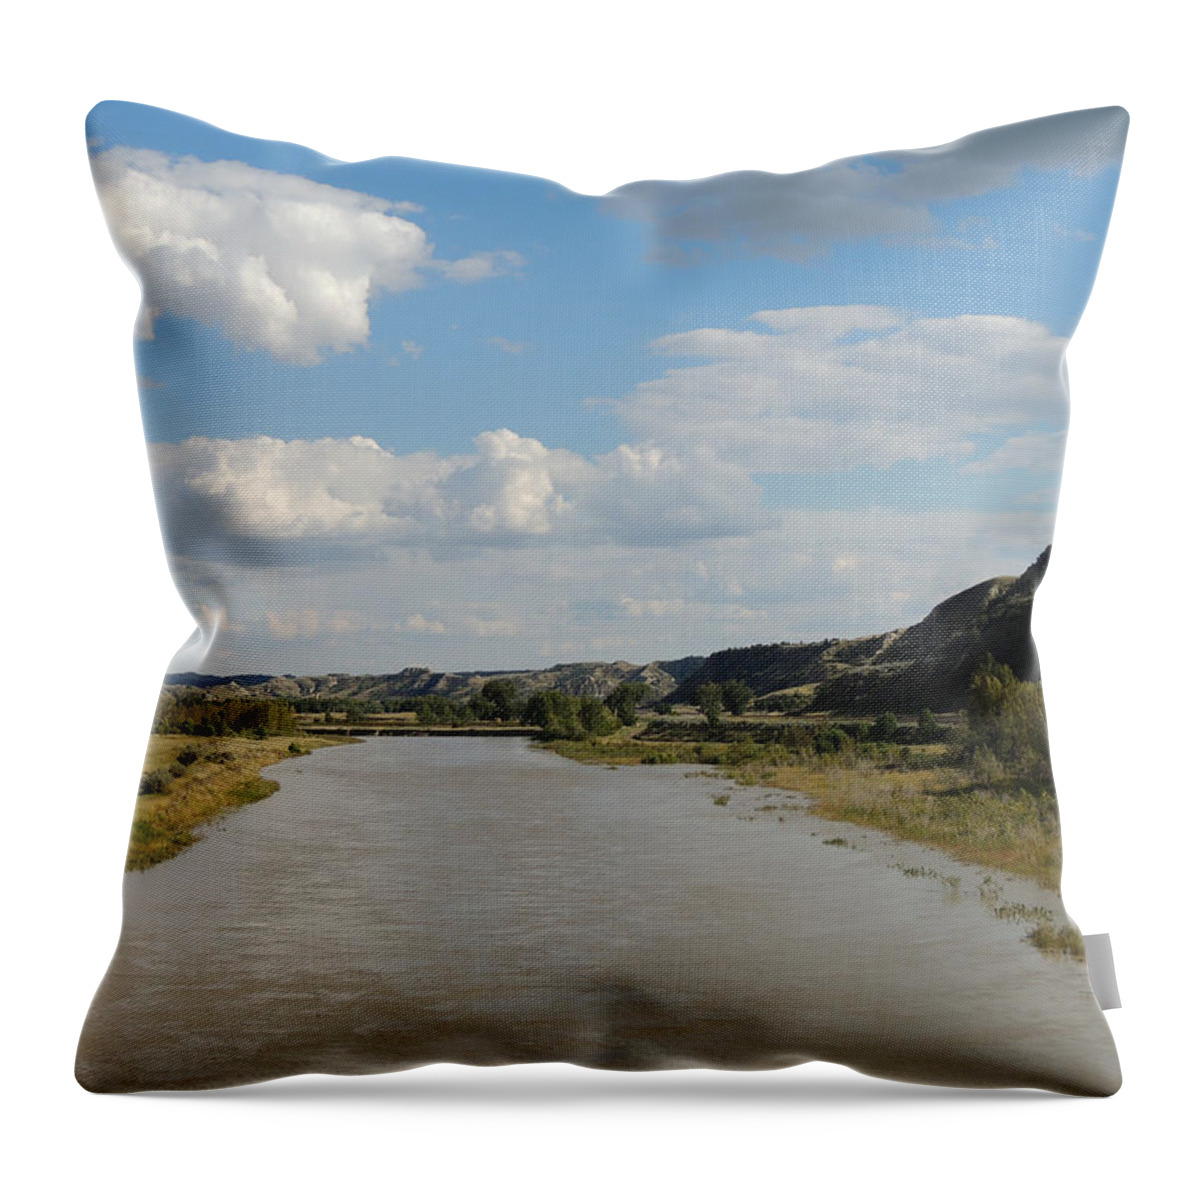 North Dakota Landscape Throw Pillow featuring the photograph North Dakota I-94 Landscape in Motion 9544 by Andrew Chambers